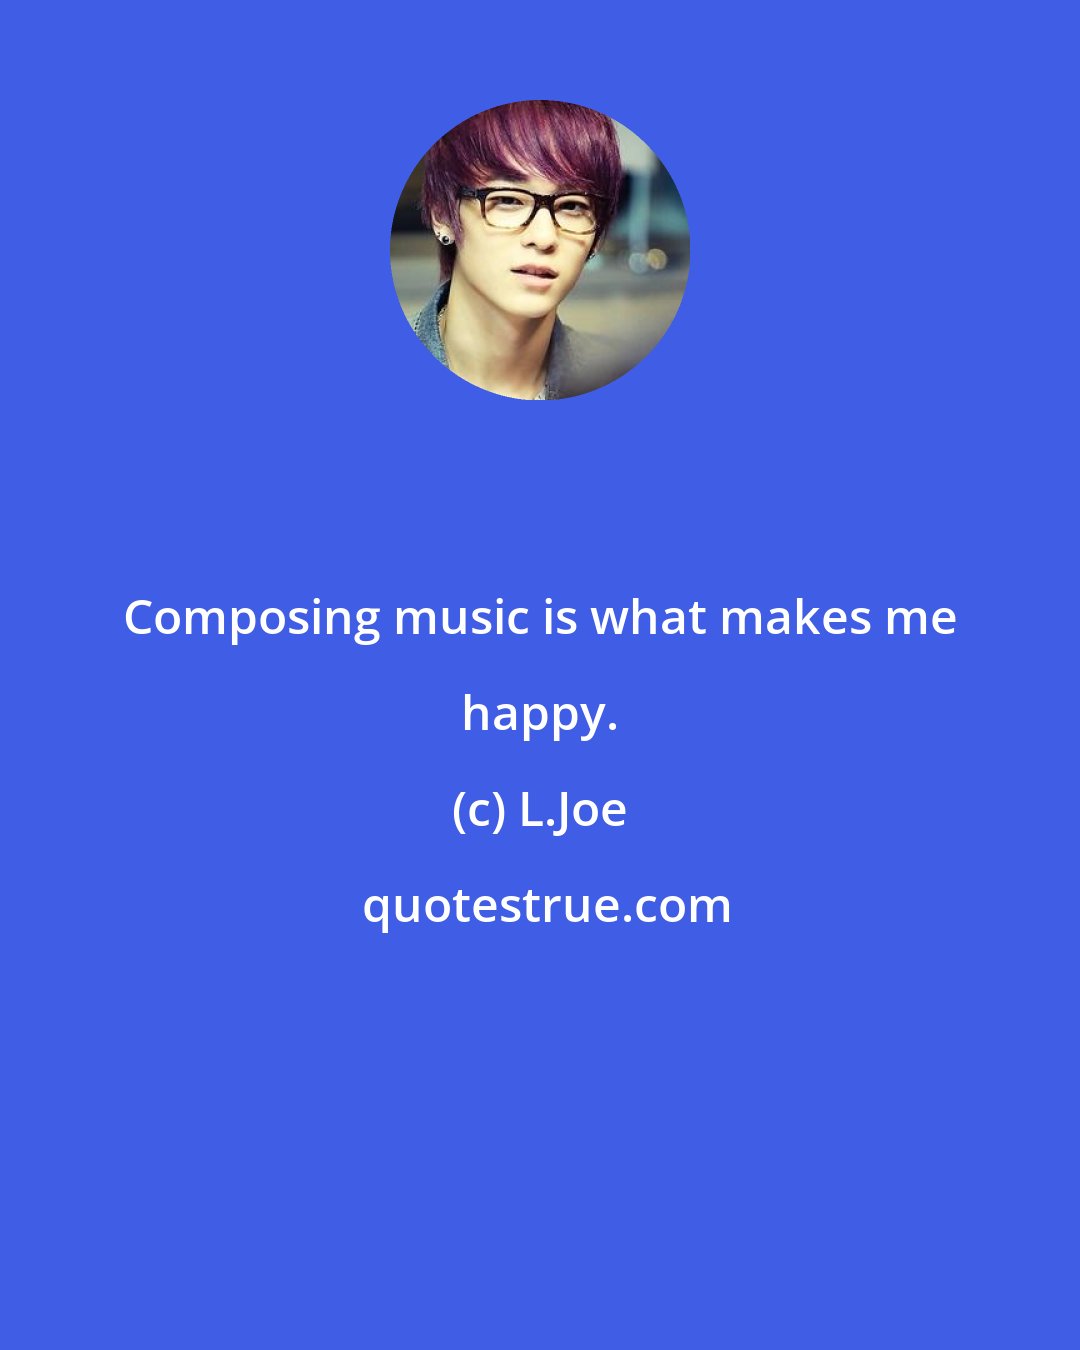 L.Joe: Composing music is what makes me happy.